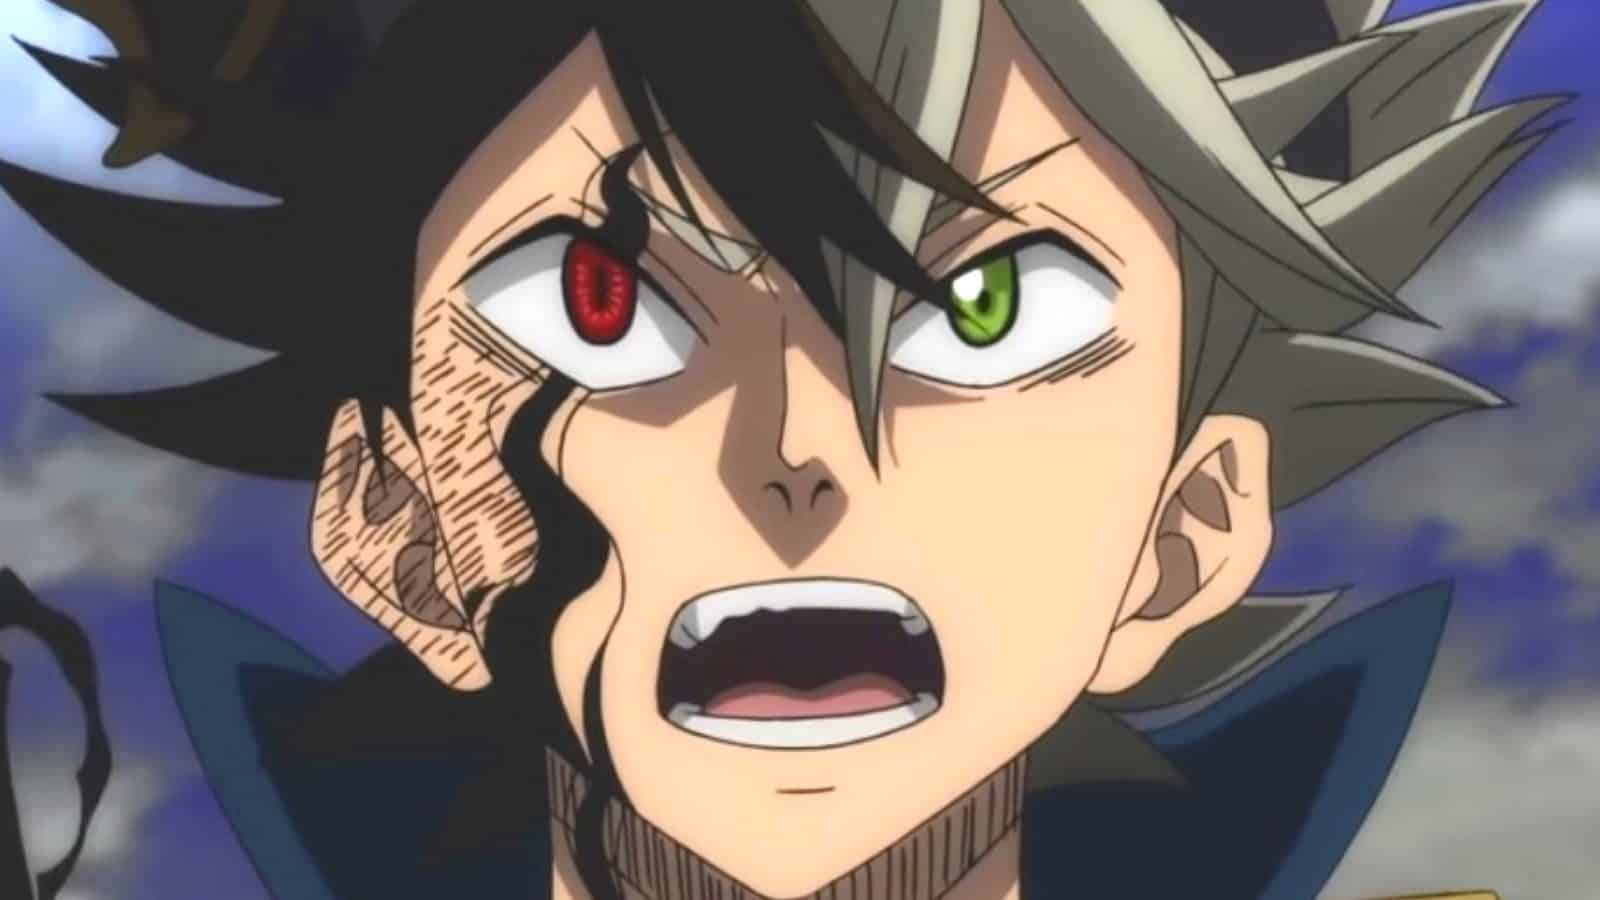 Black Clover Episode 171 Will Not Release Next Week Or Probably